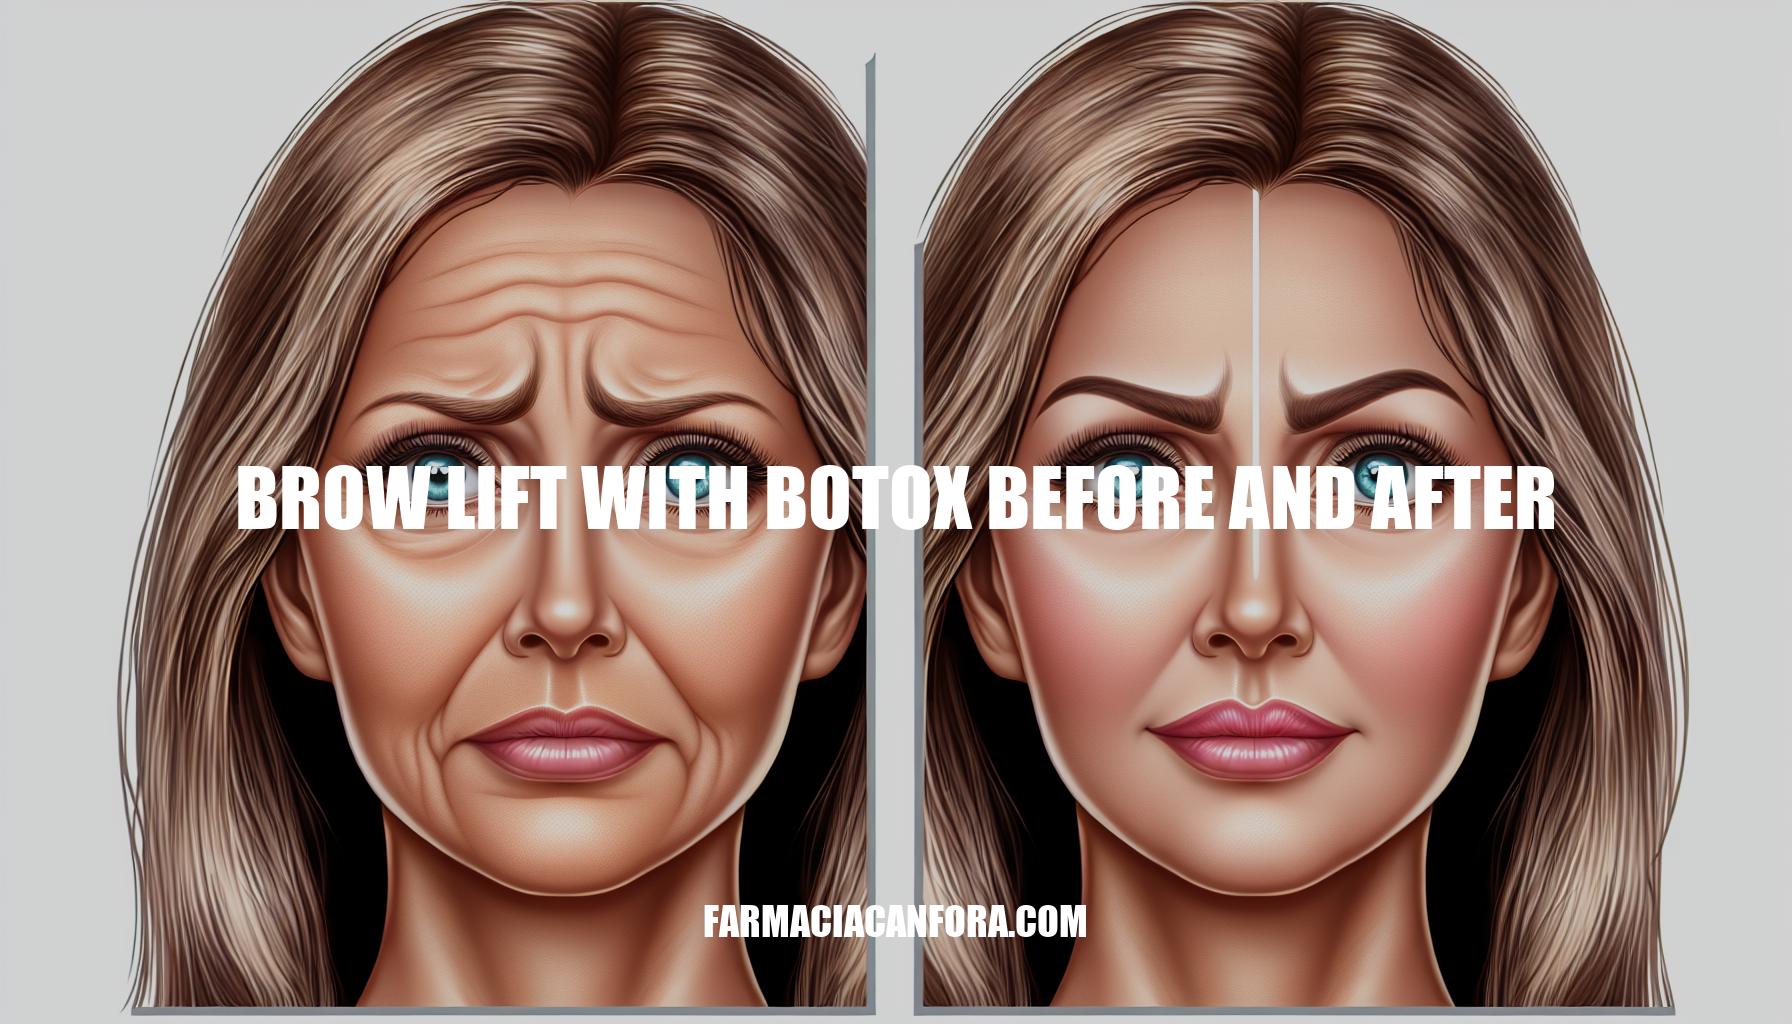 Brow Lift with Botox Before and After: A Comprehensive Guide